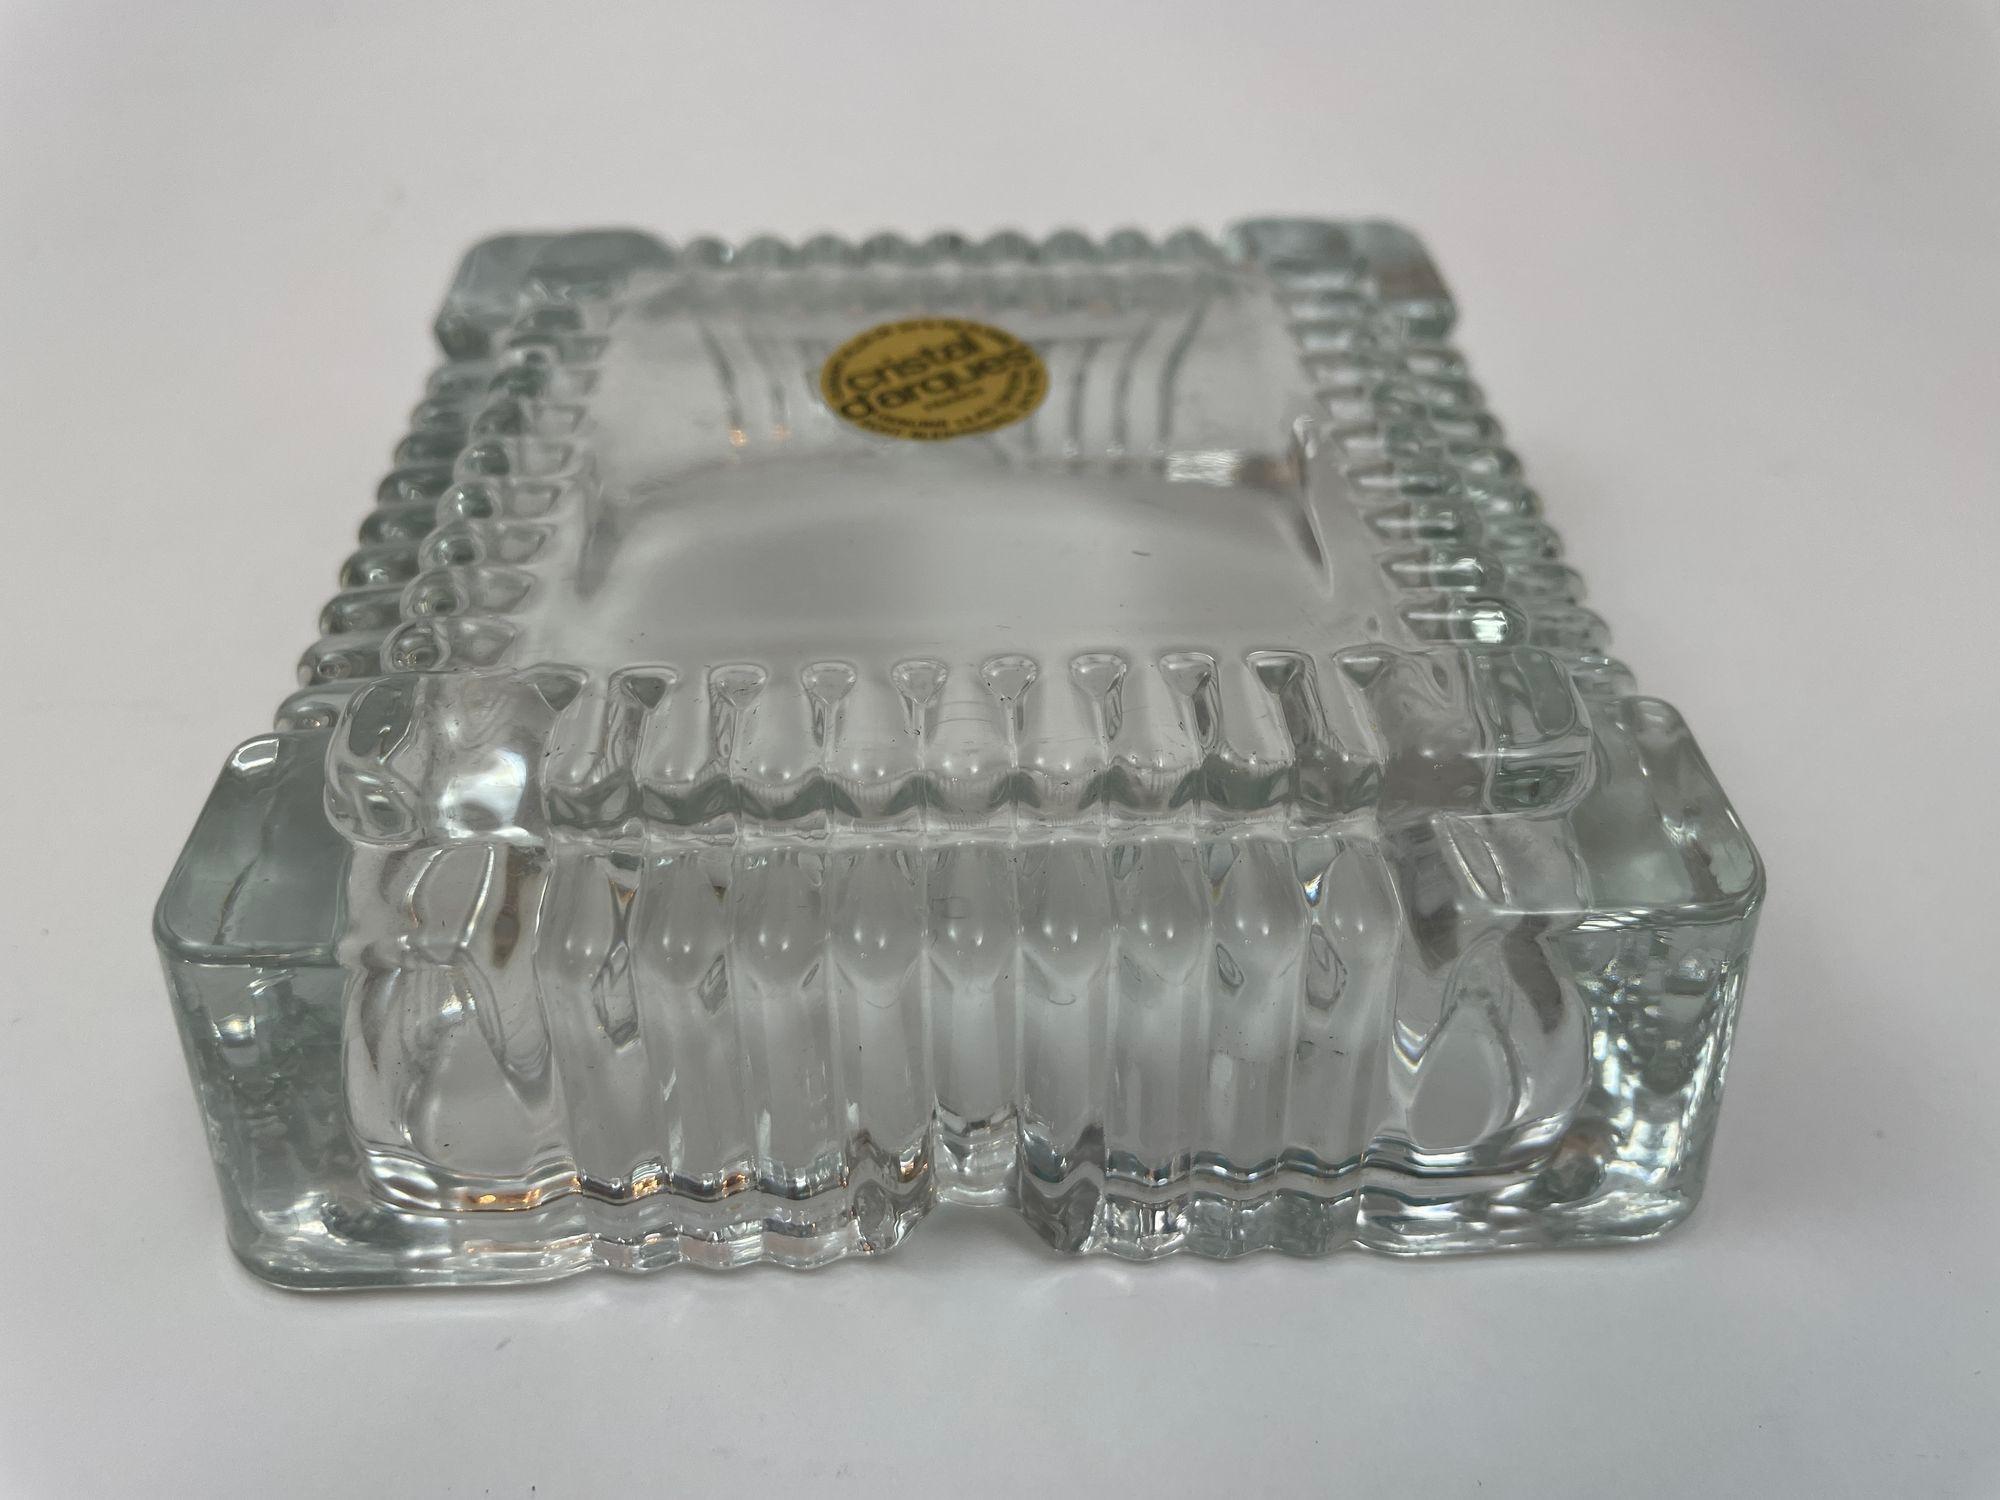 Cristal D'Arques Crystal Ashtray Trinket Dish France Cut Glass Square Catchall For Sale 2